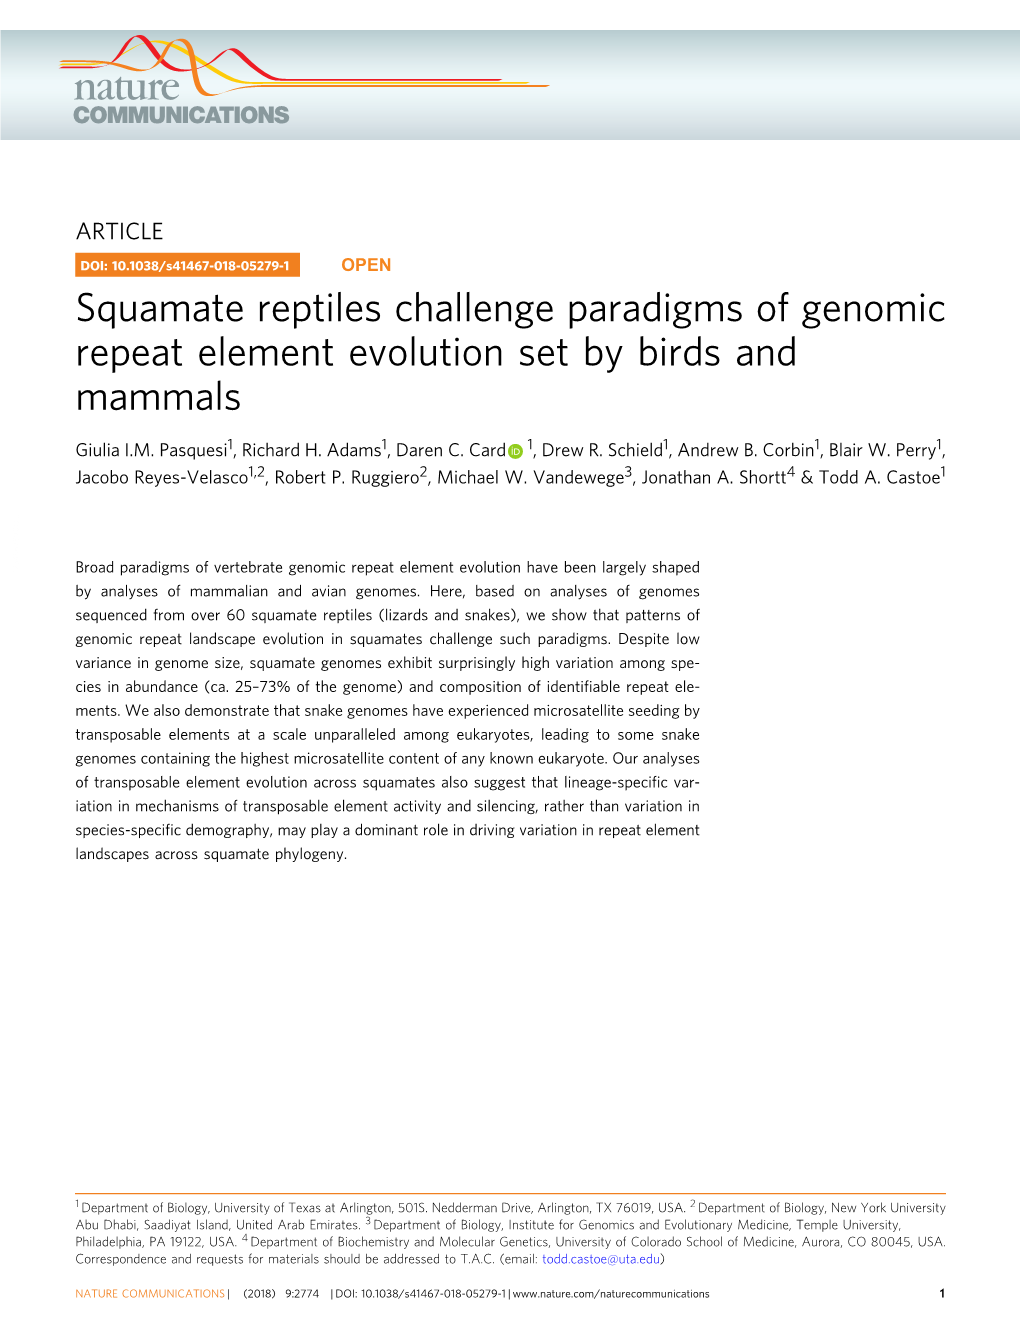 Squamate Reptiles Challenge Paradigms of Genomic Repeat Element Evolution Set by Birds and Mammals